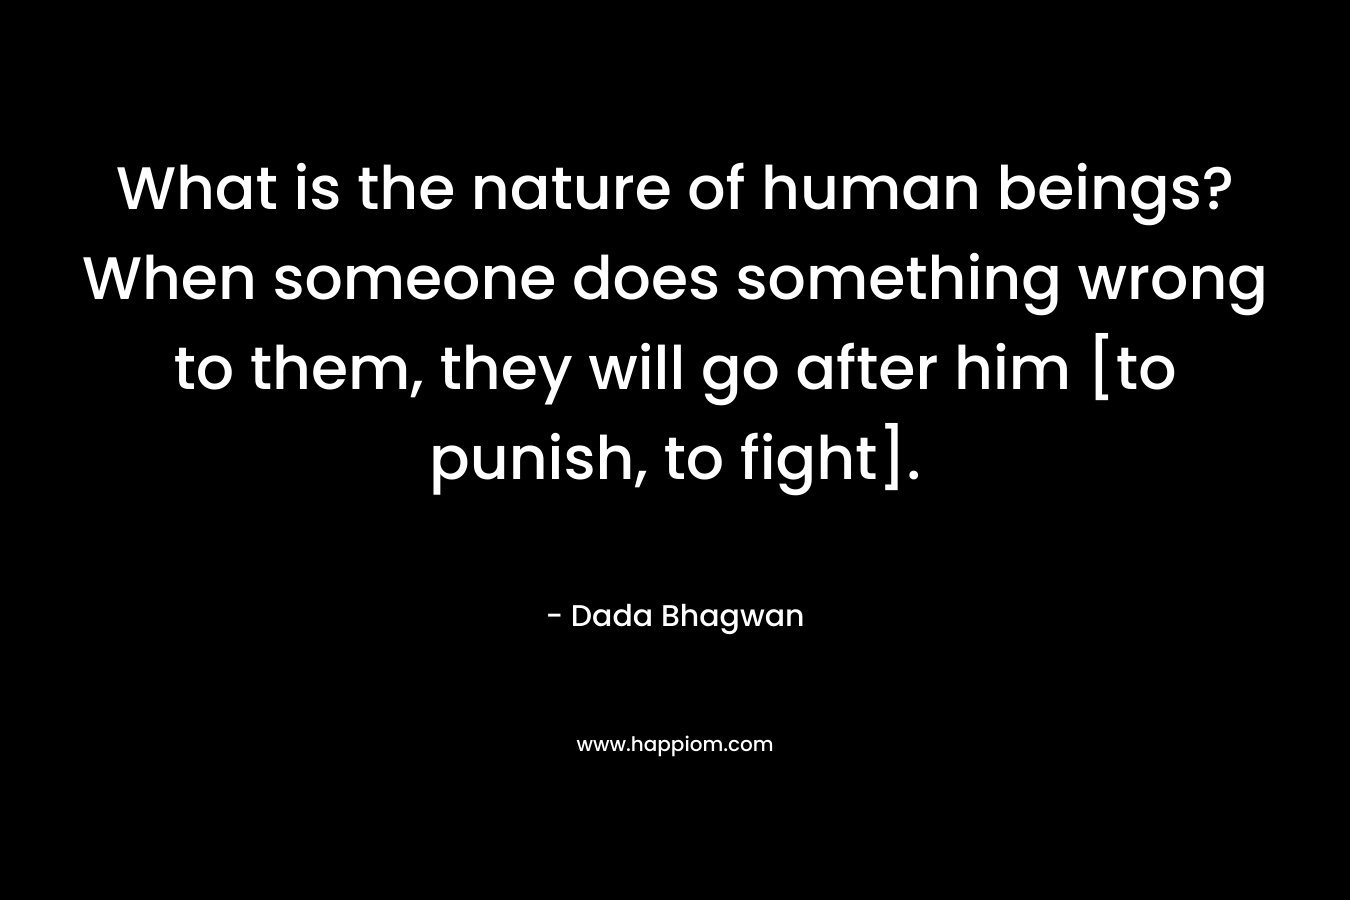 What is the nature of human beings? When someone does something wrong to them, they will go after him [to punish, to fight].